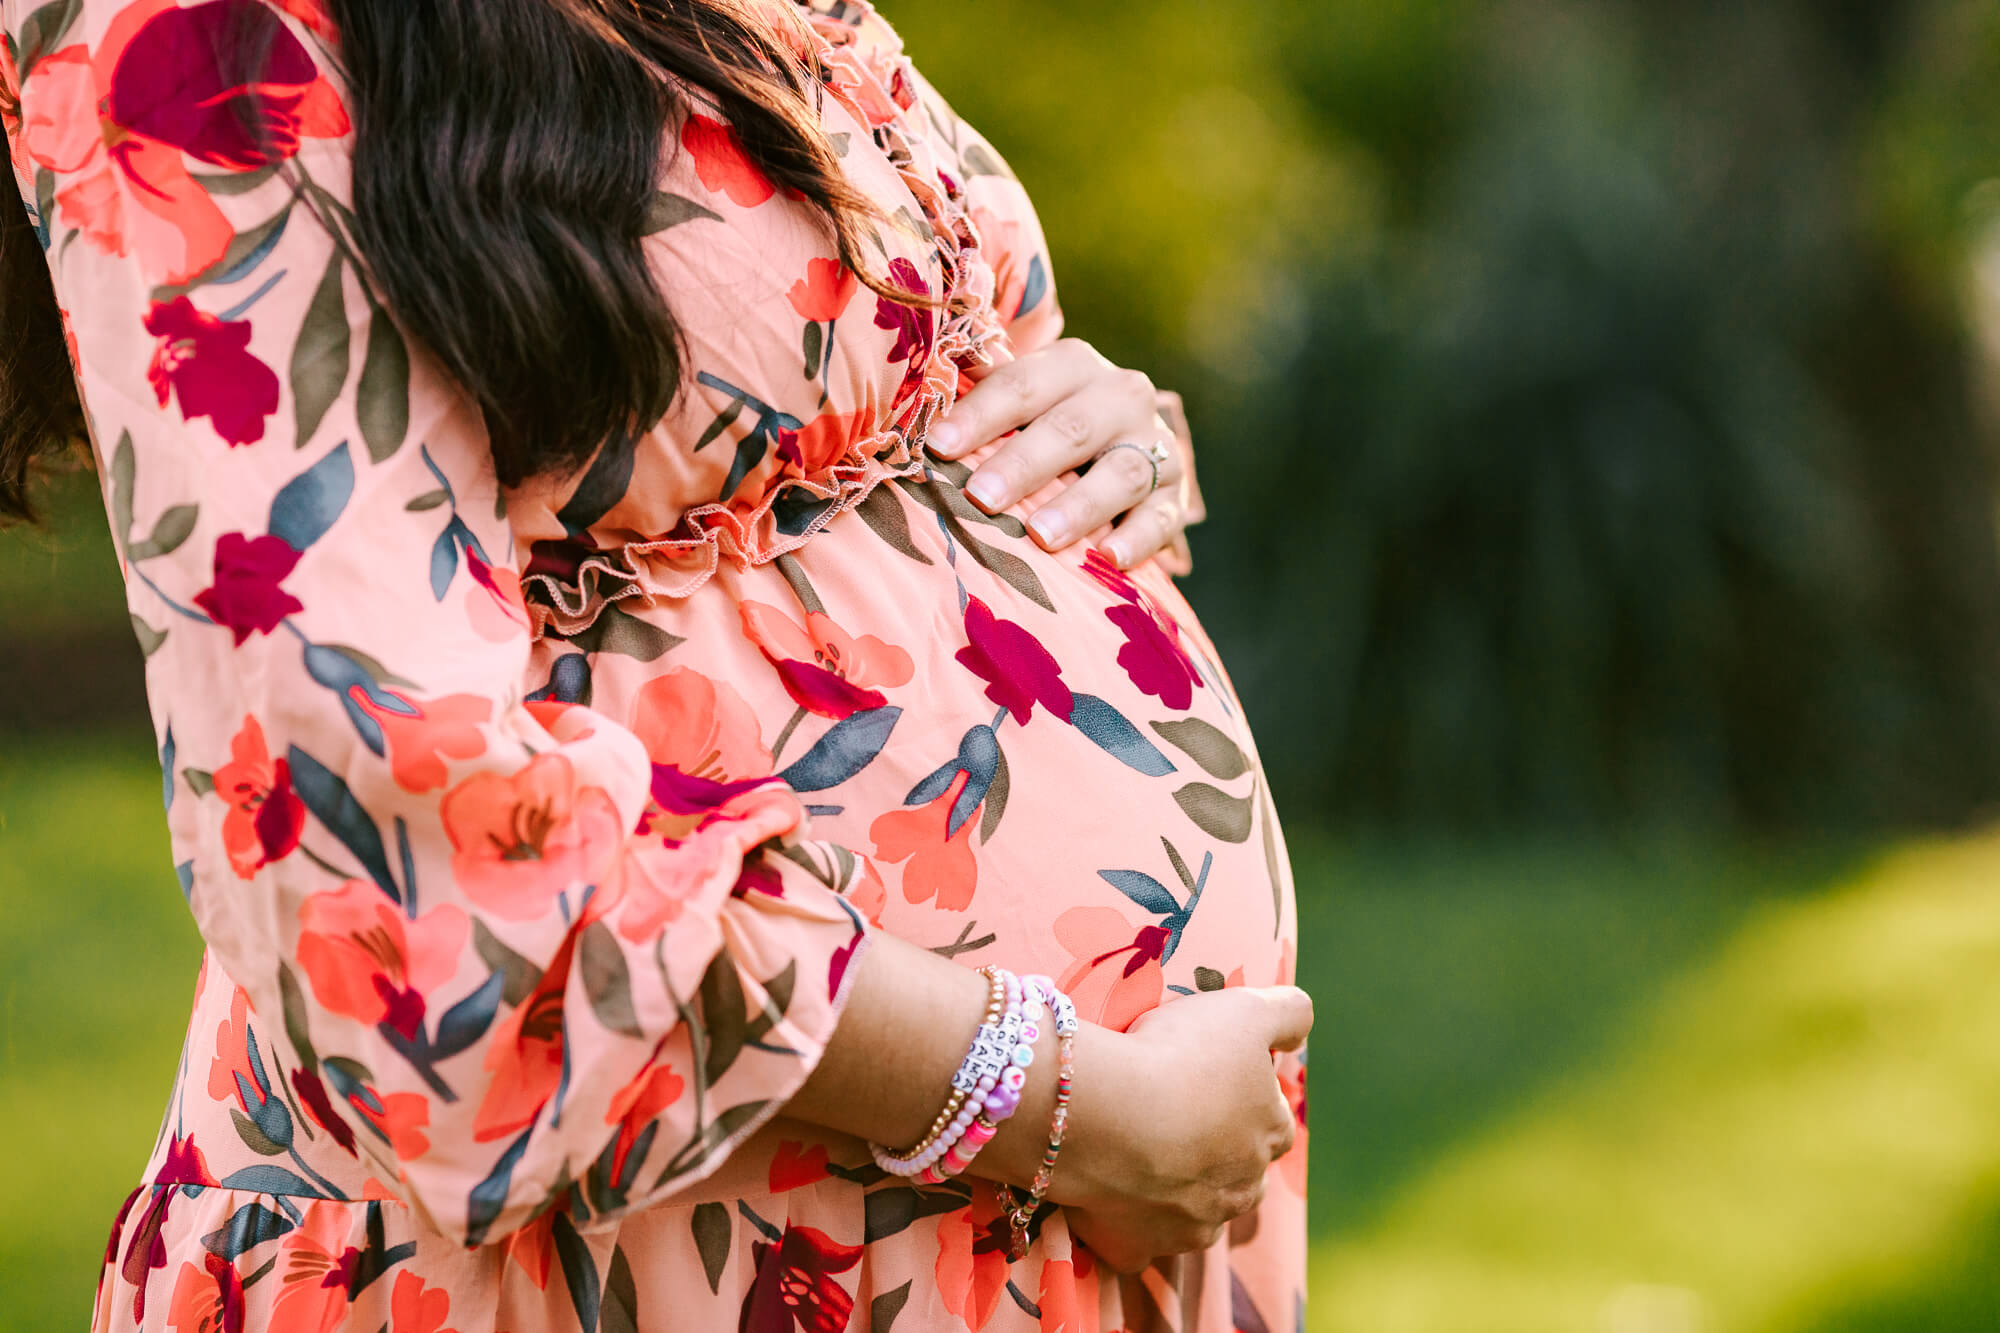 Image of a woman's torso only, with her hands gently framing her stomach. She is about 7 months pregnant and is wearing a pink flowered dress, with a green lawn behind her.